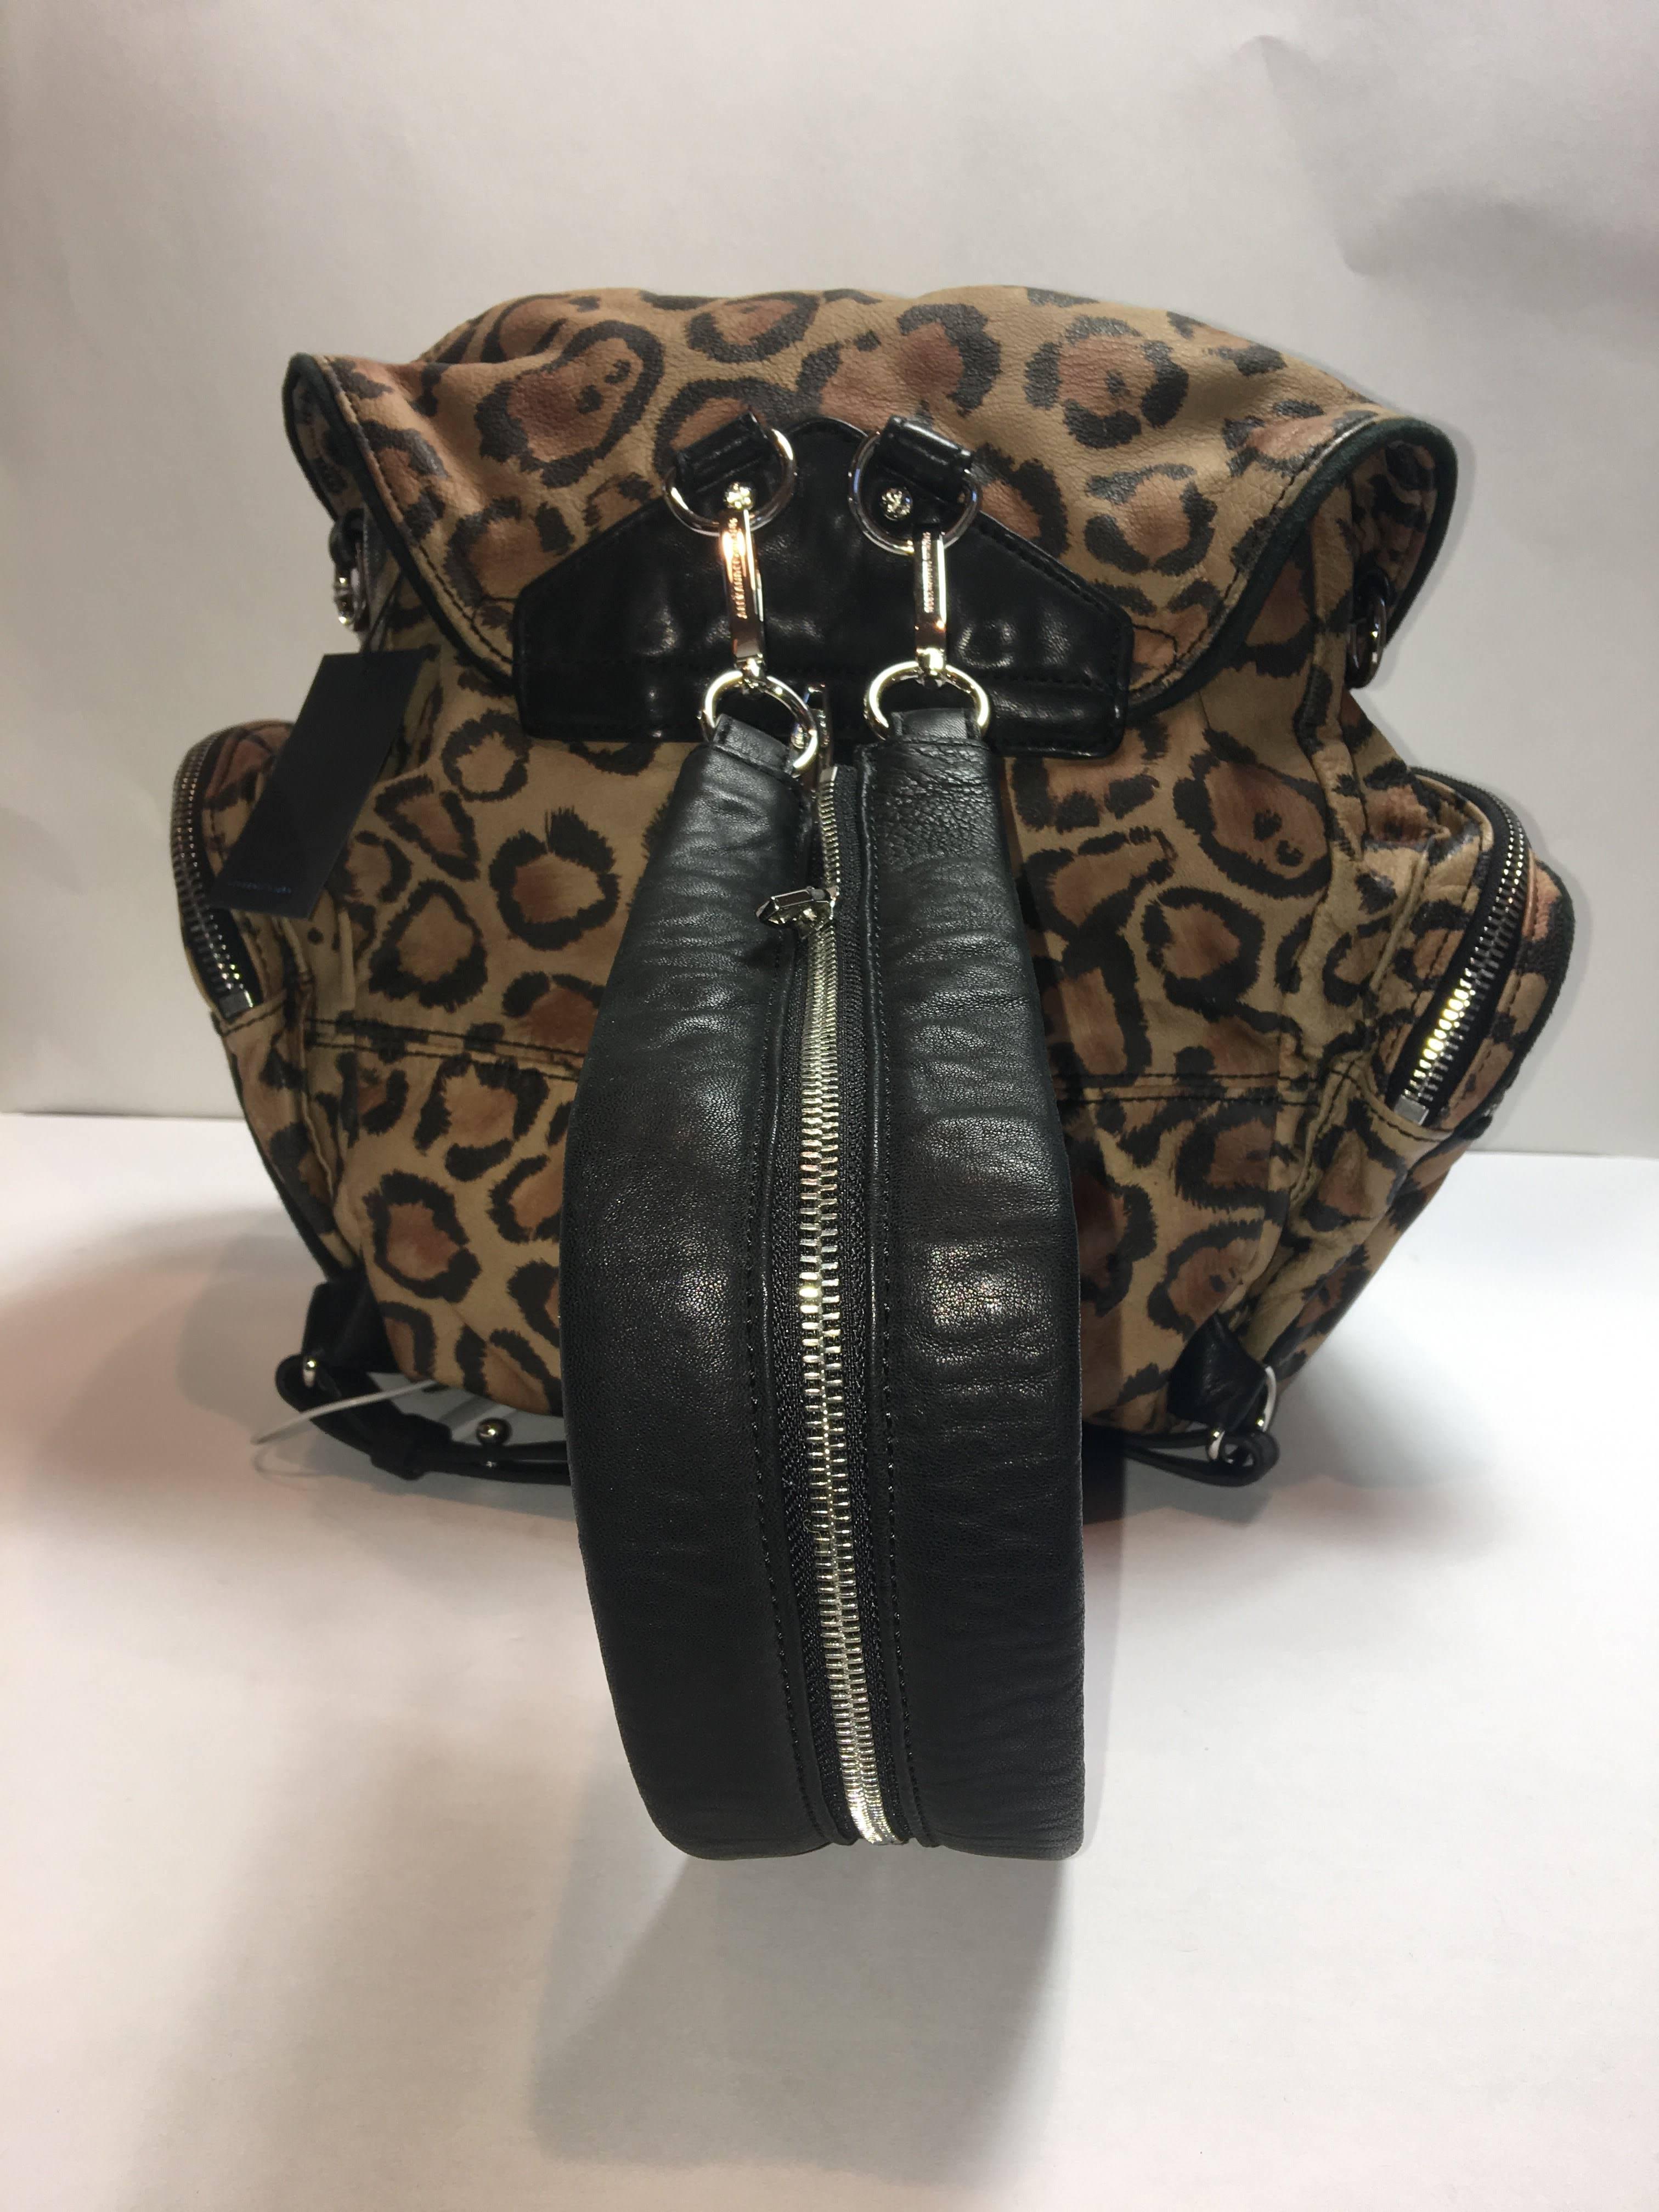 Alexander Wang Leather Backpack with Leopard print and Zipper details.